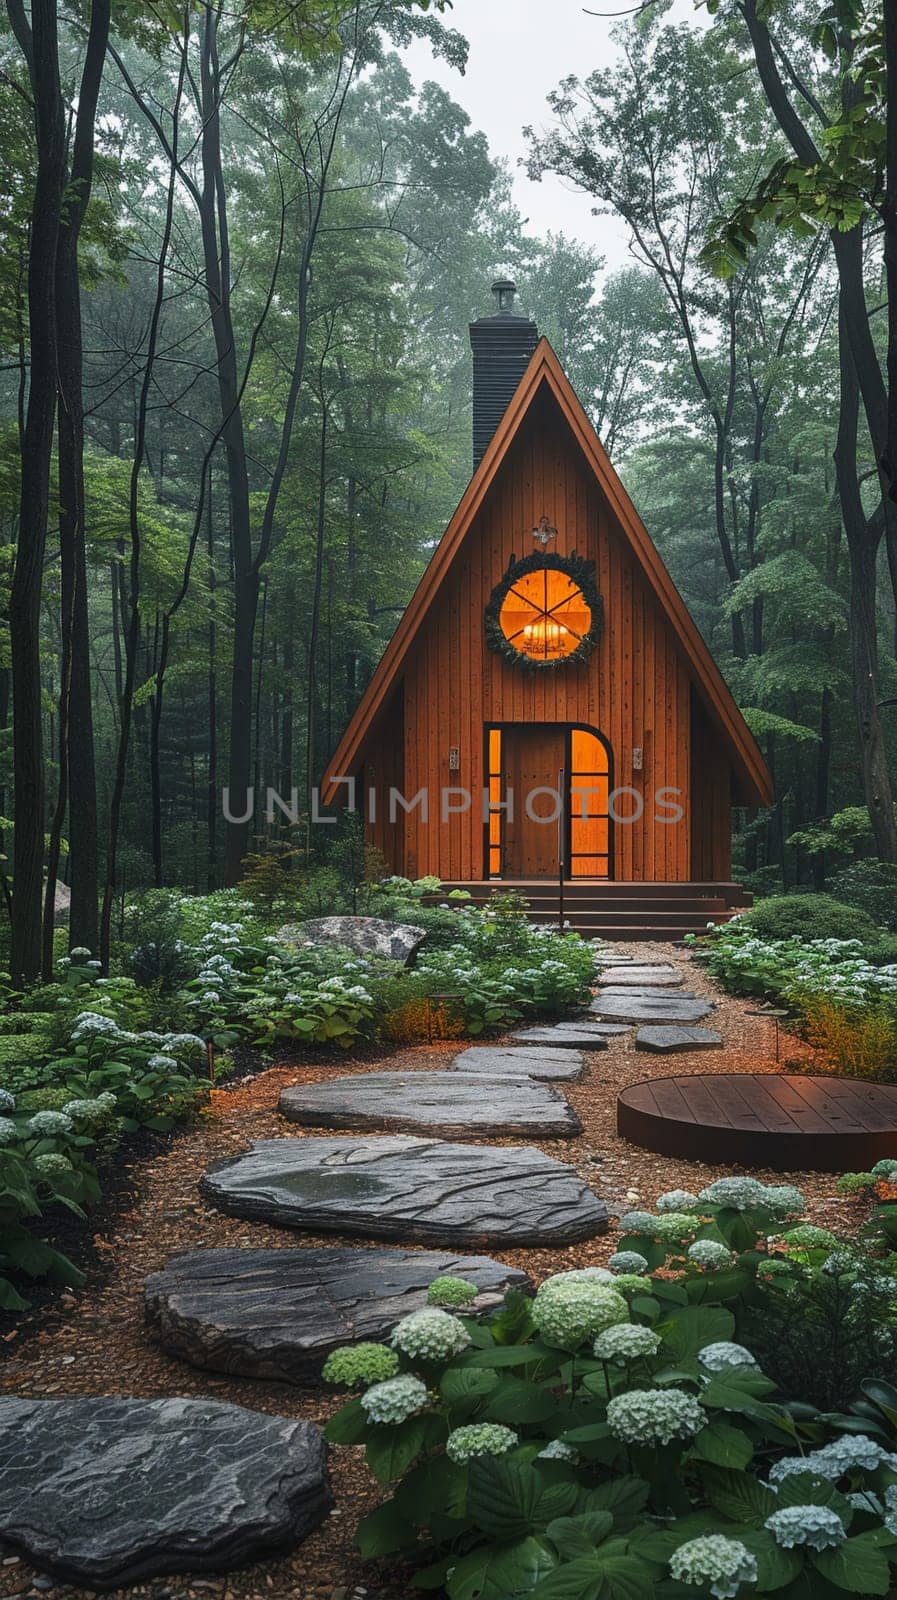 Rustic Wooden Chapel Nestled in Serene Nature, The outline of the humble structure merges with the tranquility of its surroundings.